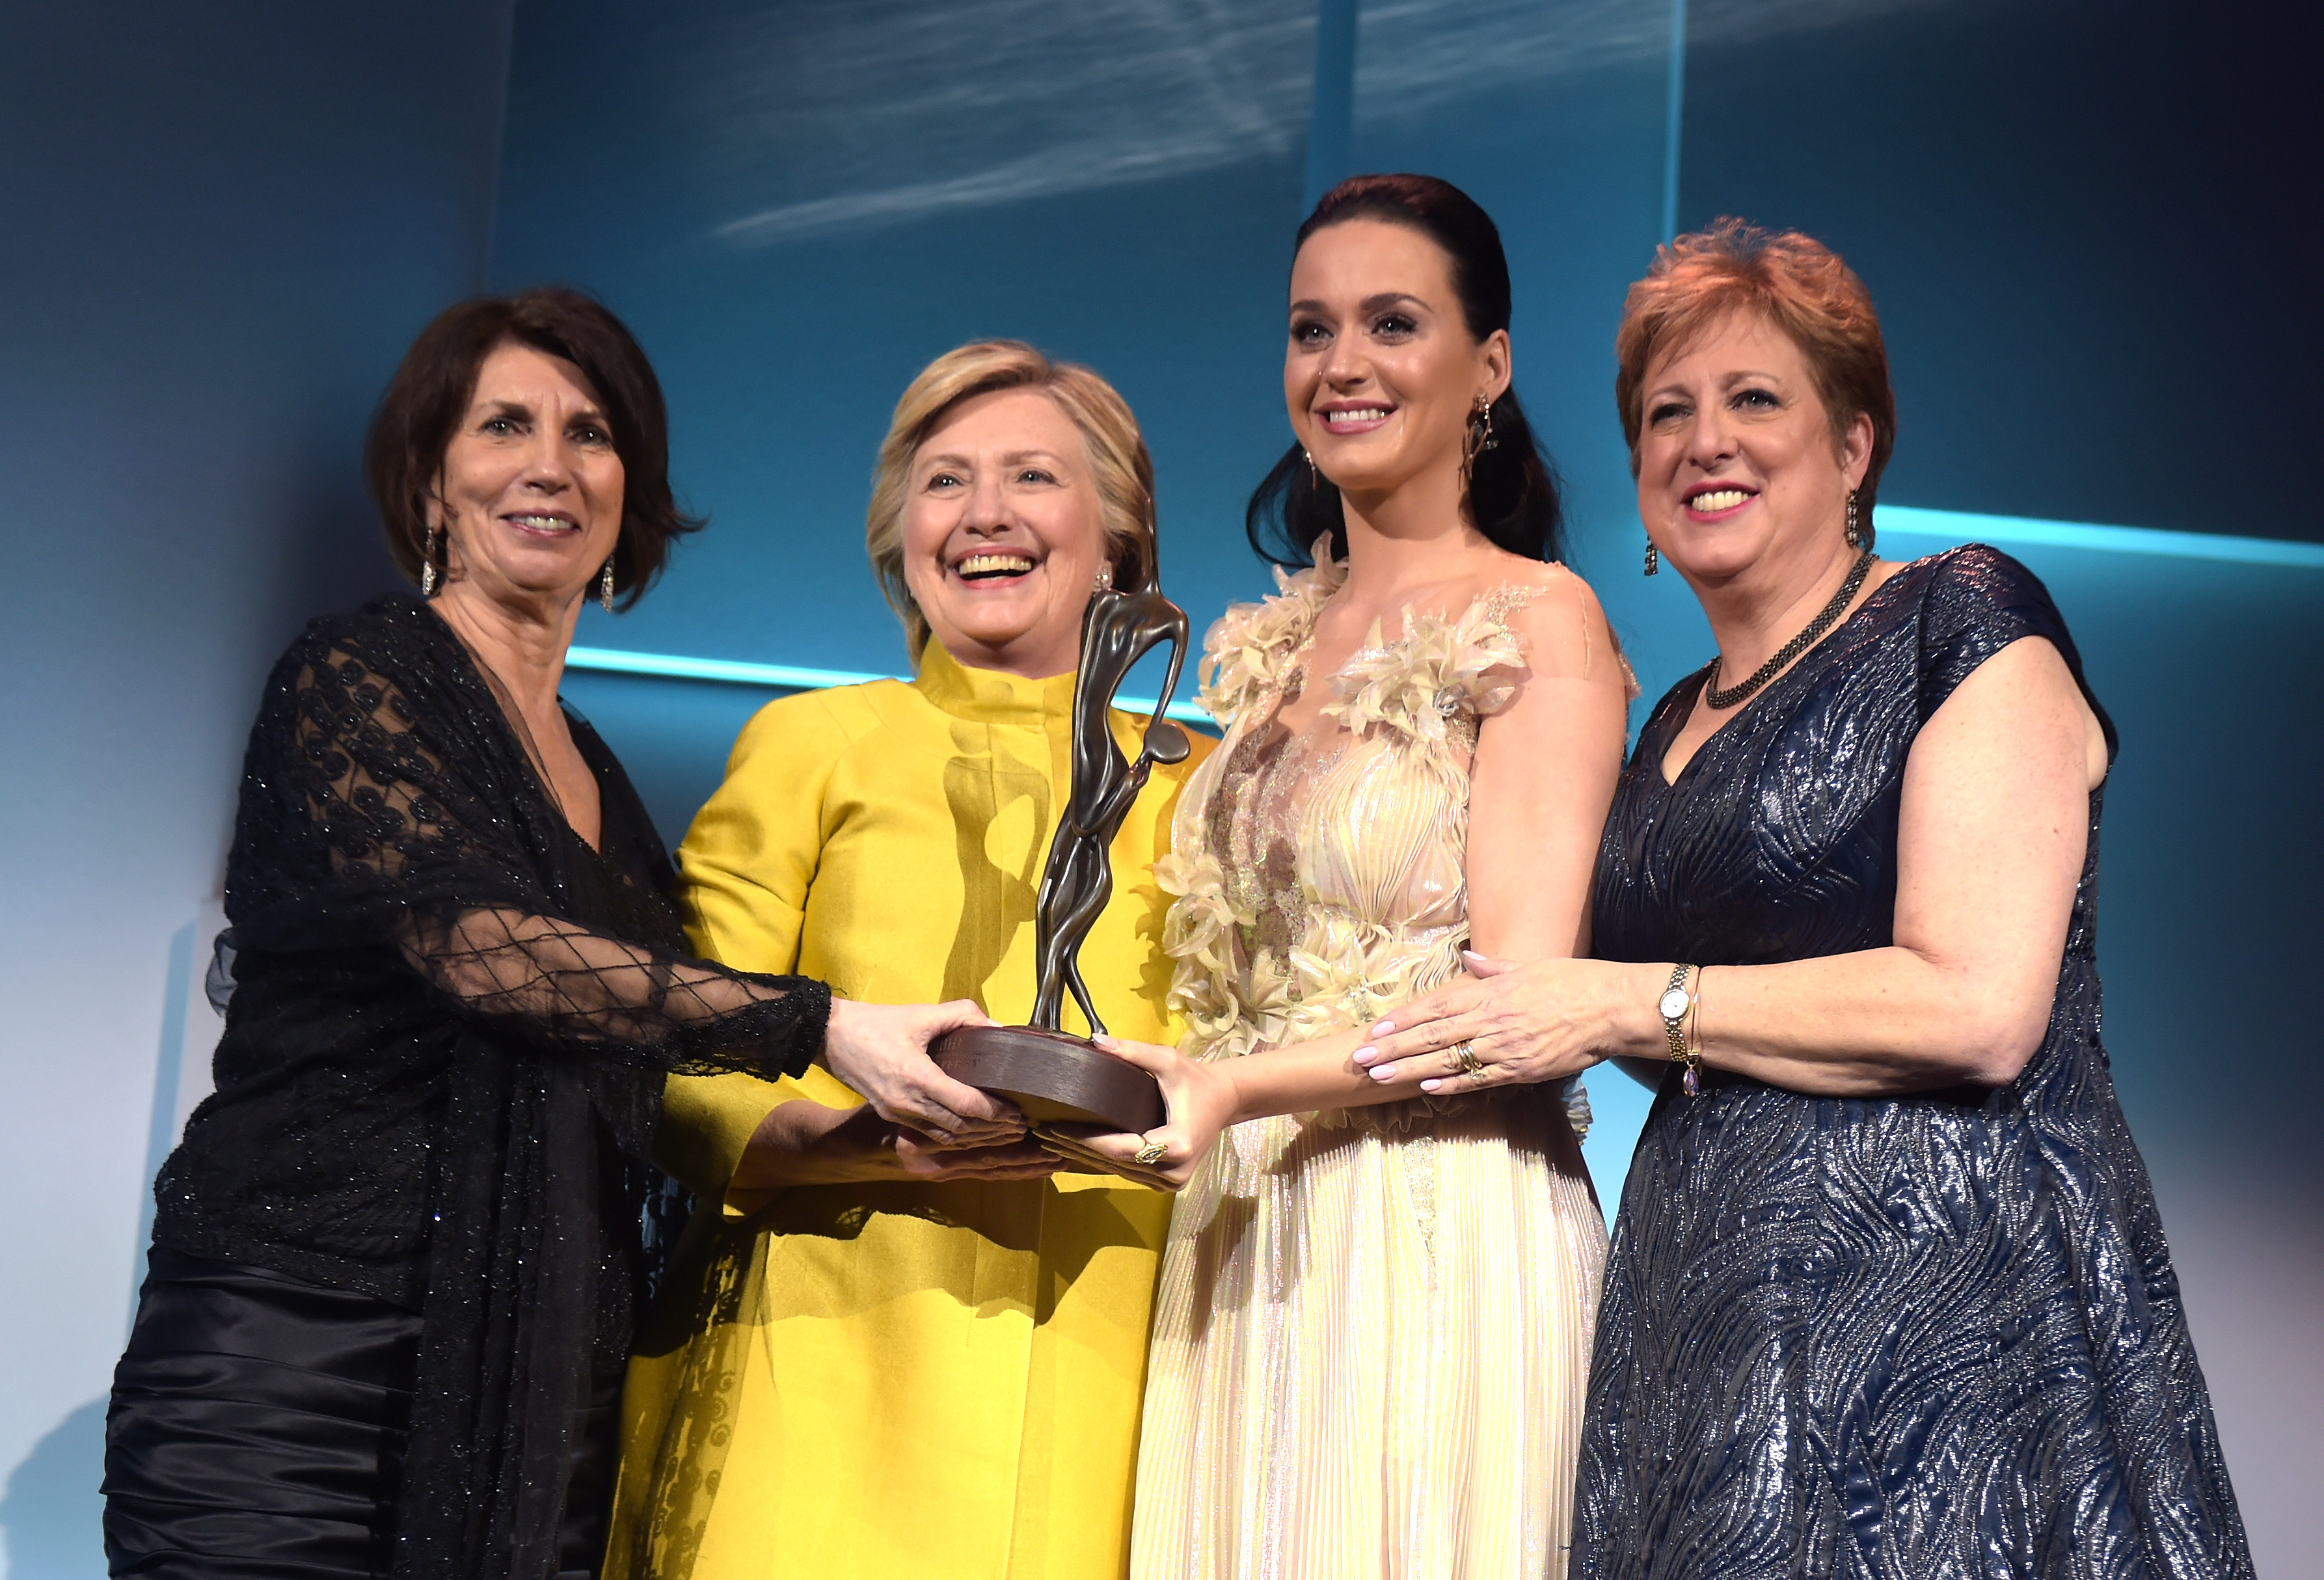 NEW YORK, NY - NOVEMBER 29: (L-R) Pamela Fiori, Hillary Clinton, Katy Perry, and Caryl Stern speak on stage during the 12th annual UNICEF Snowflake Ball at Cipriani Wall Street on November 29, 2016 in New York City.   Jason Kempin/Getty Images for UNICEF/AFP